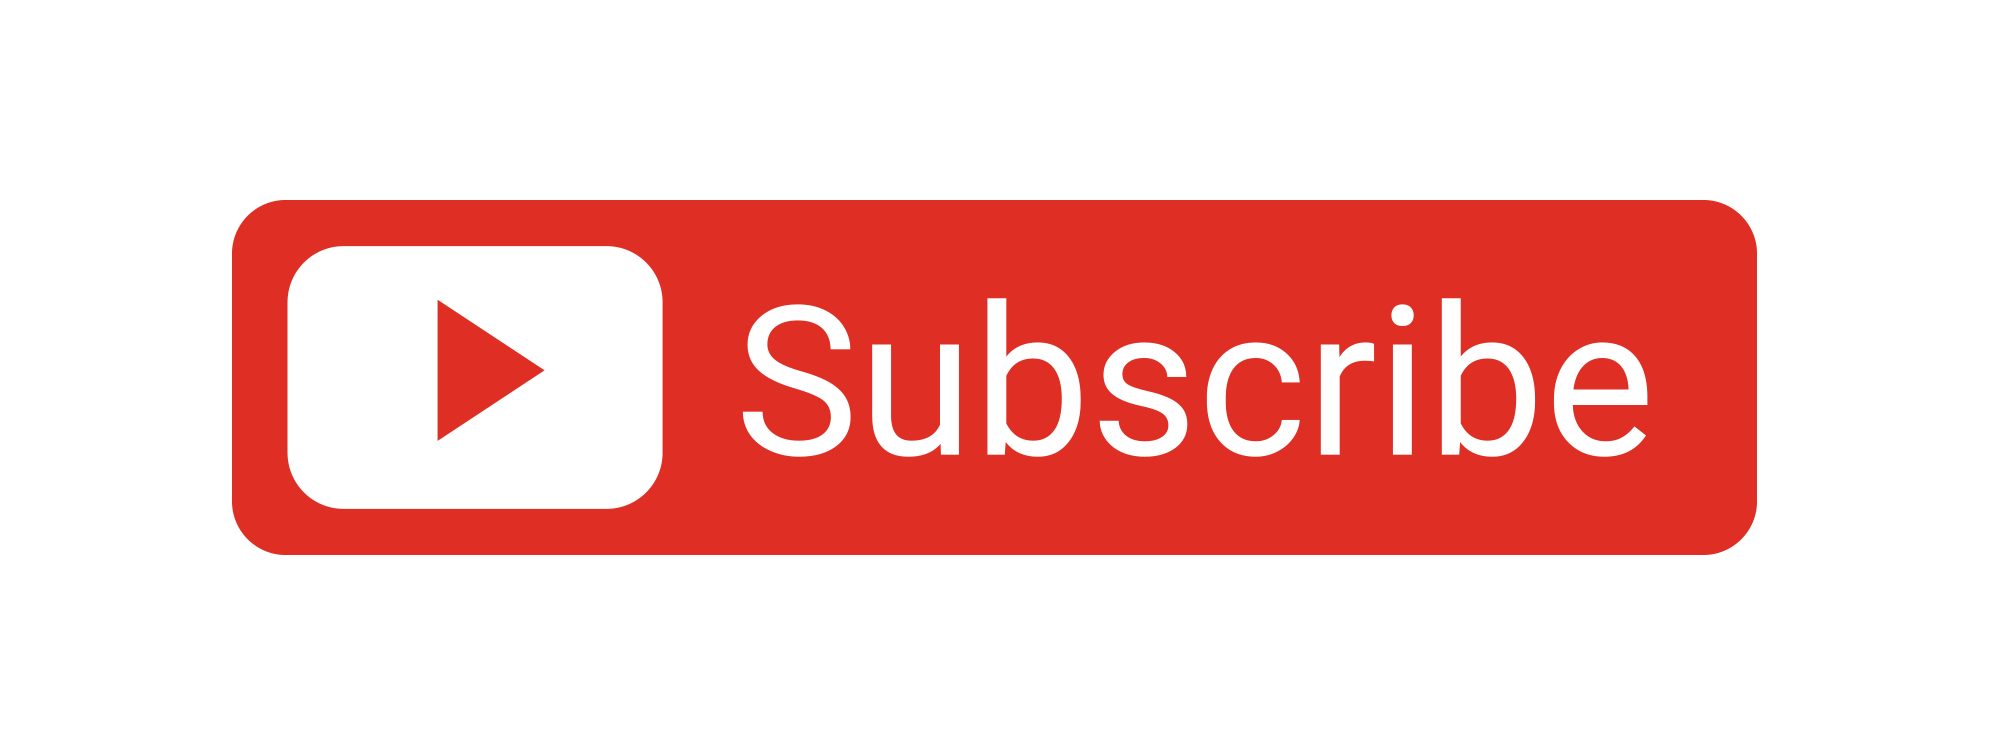 Subscribe Button PNG, Subscribe Buttons Transparent images - Free